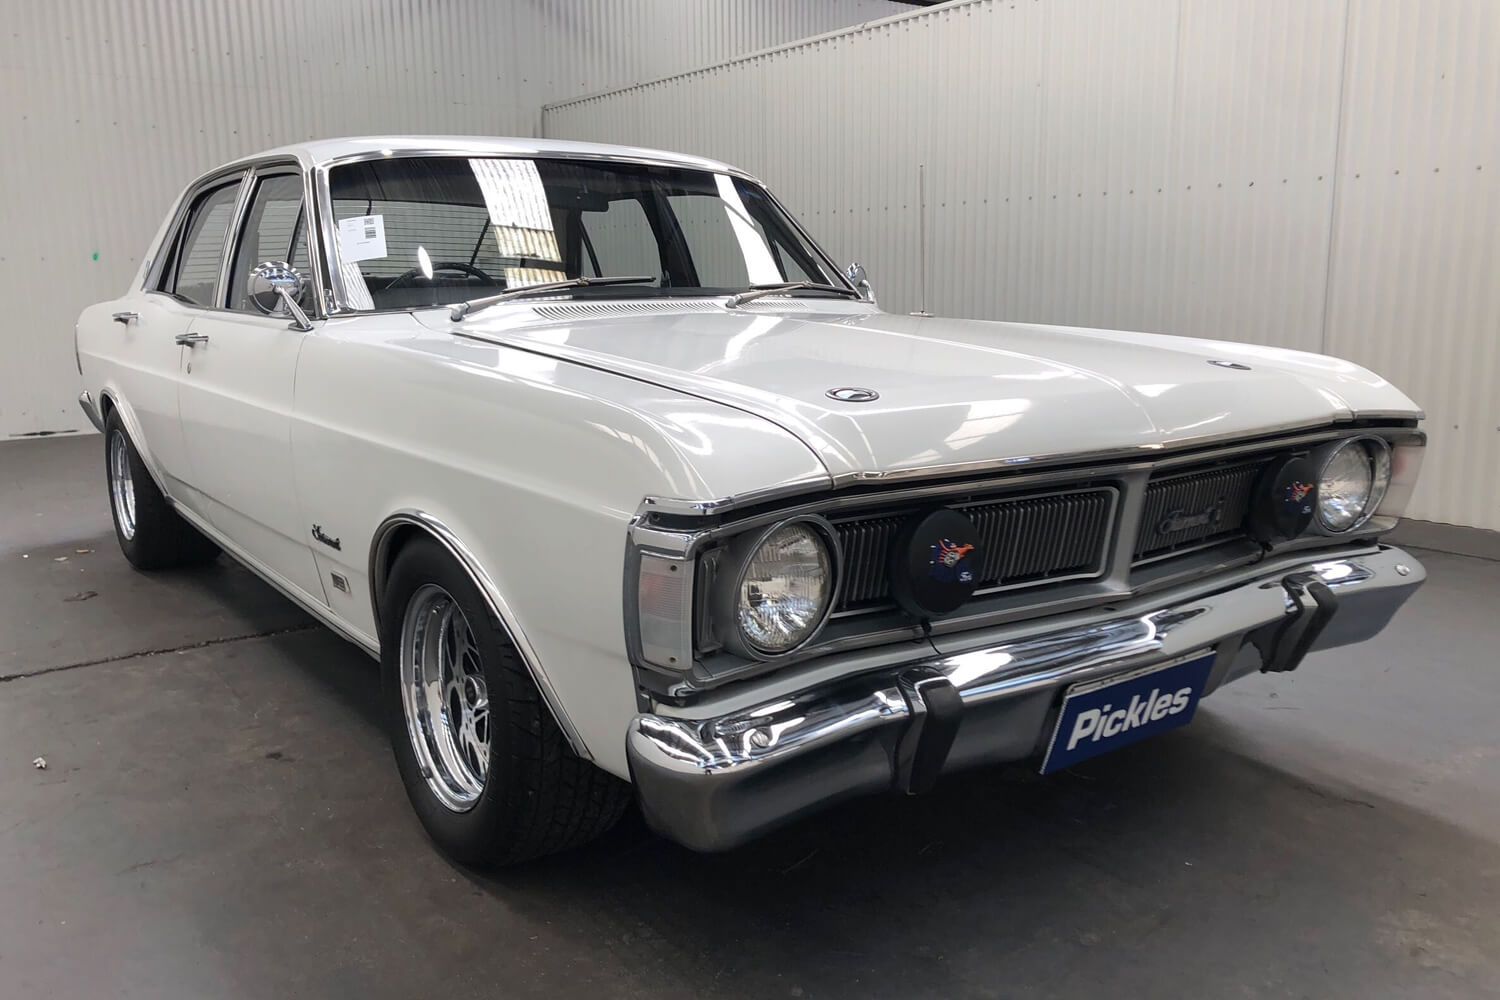 View a white 1970 Ford Fairmont XY available via auction.